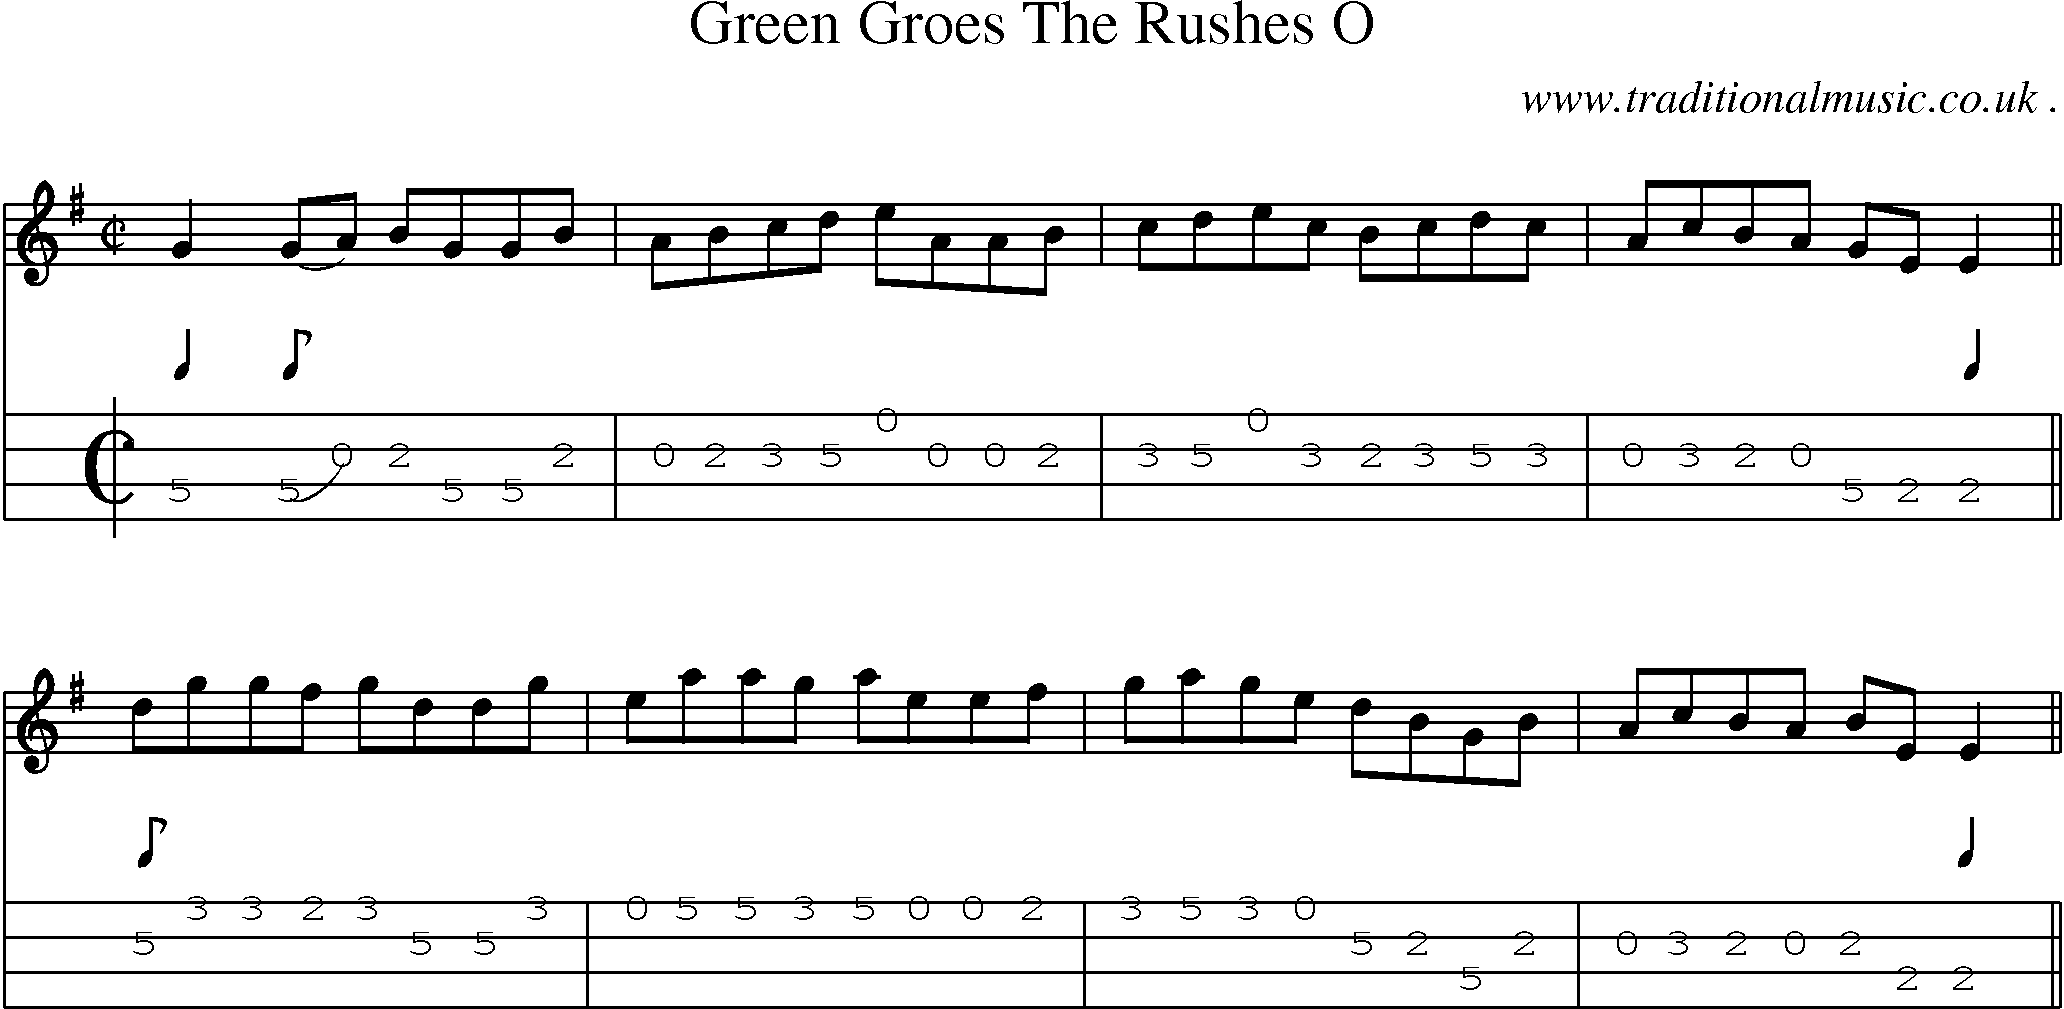 Sheet-Music and Mandolin Tabs for Green Groes The Rushes O